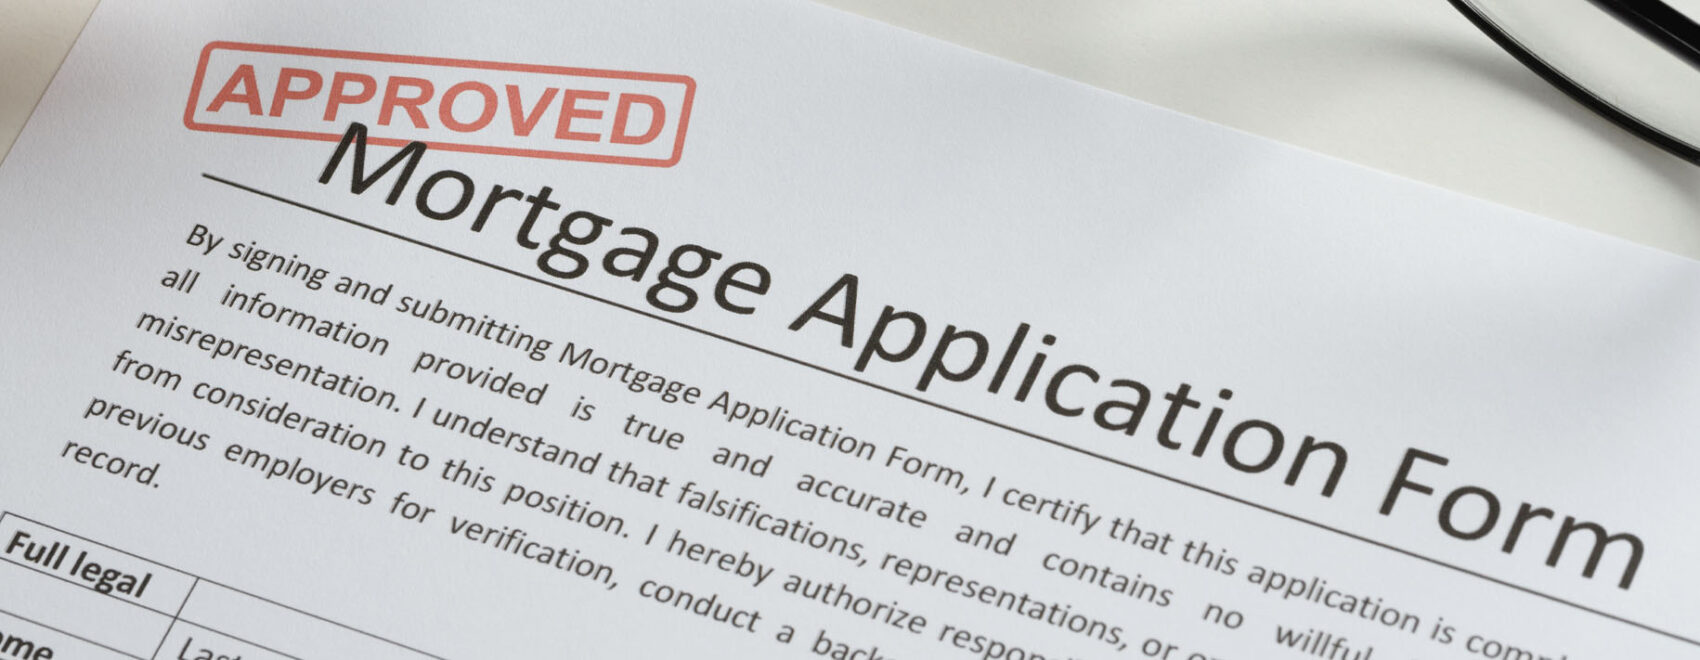 Image of a mortgage application